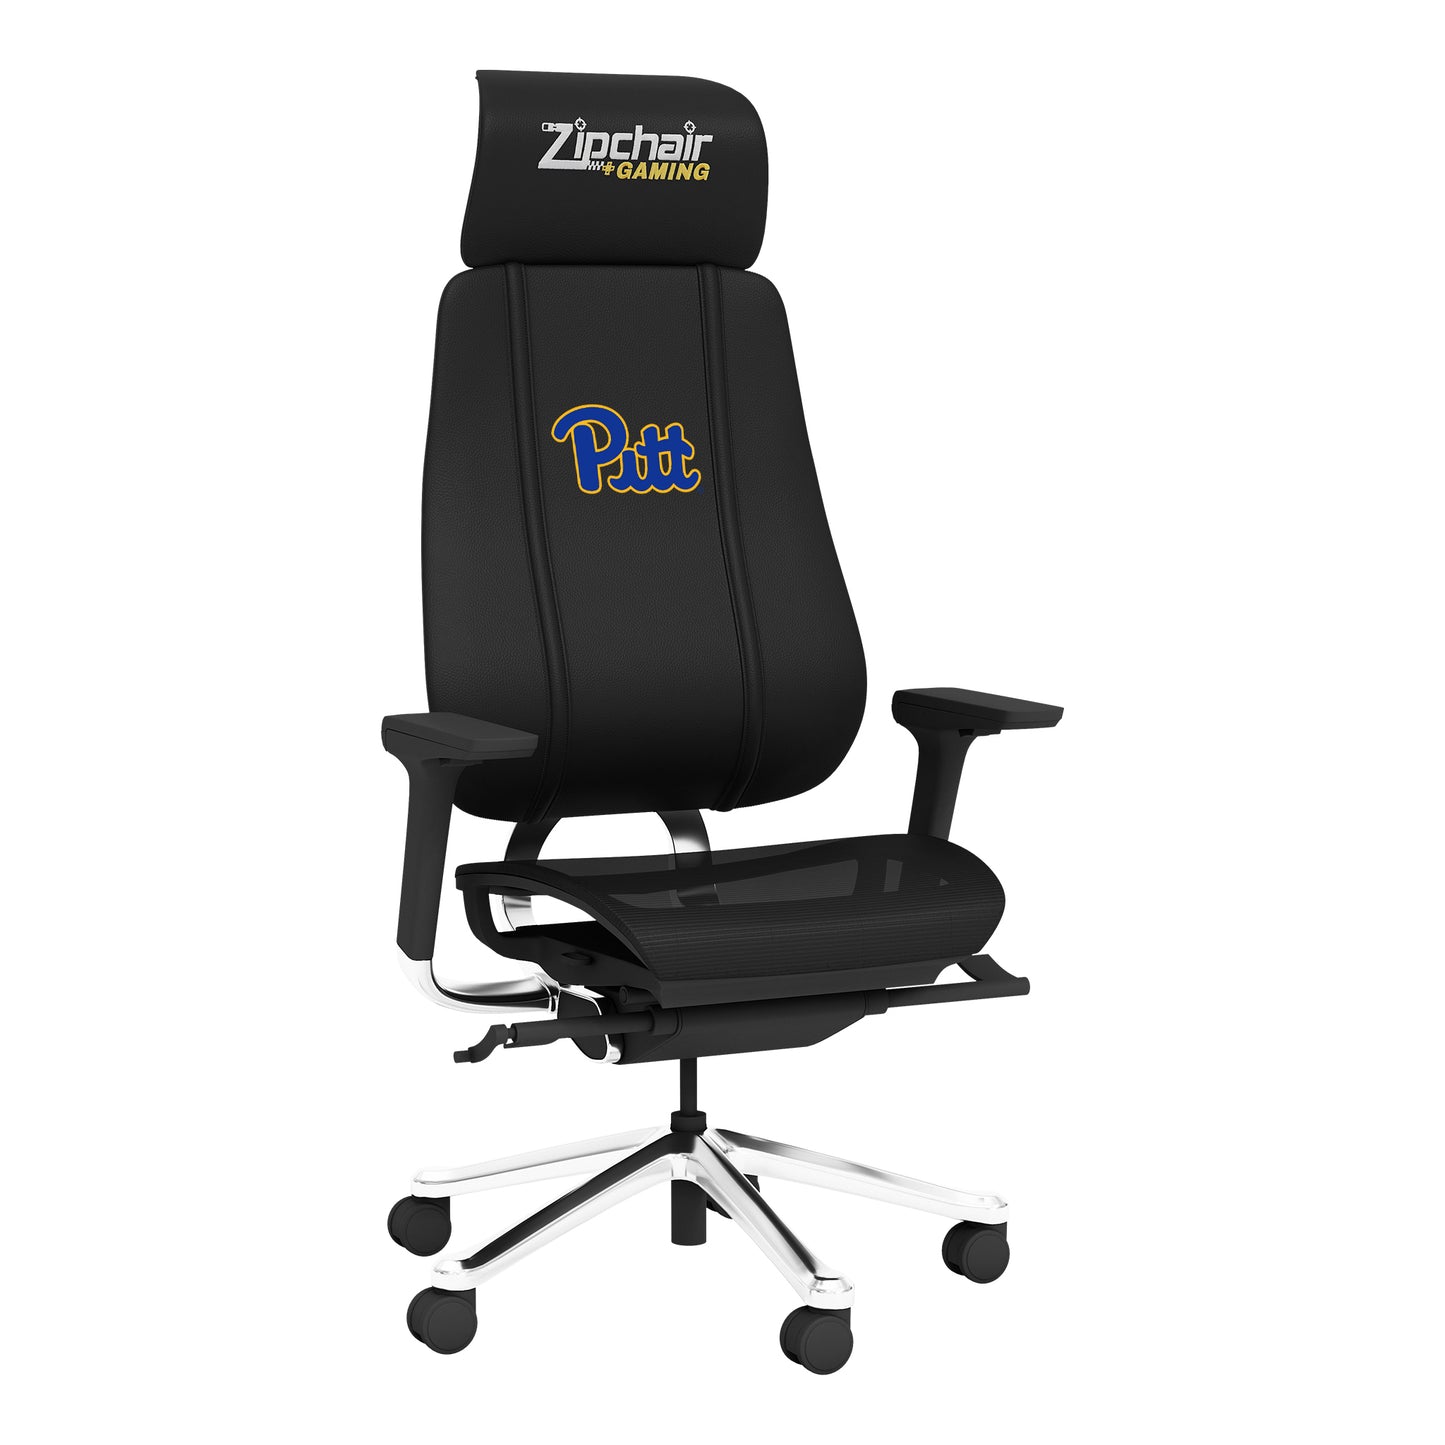 PhantomX Gaming Chair with Pittsburgh Panthers Logo